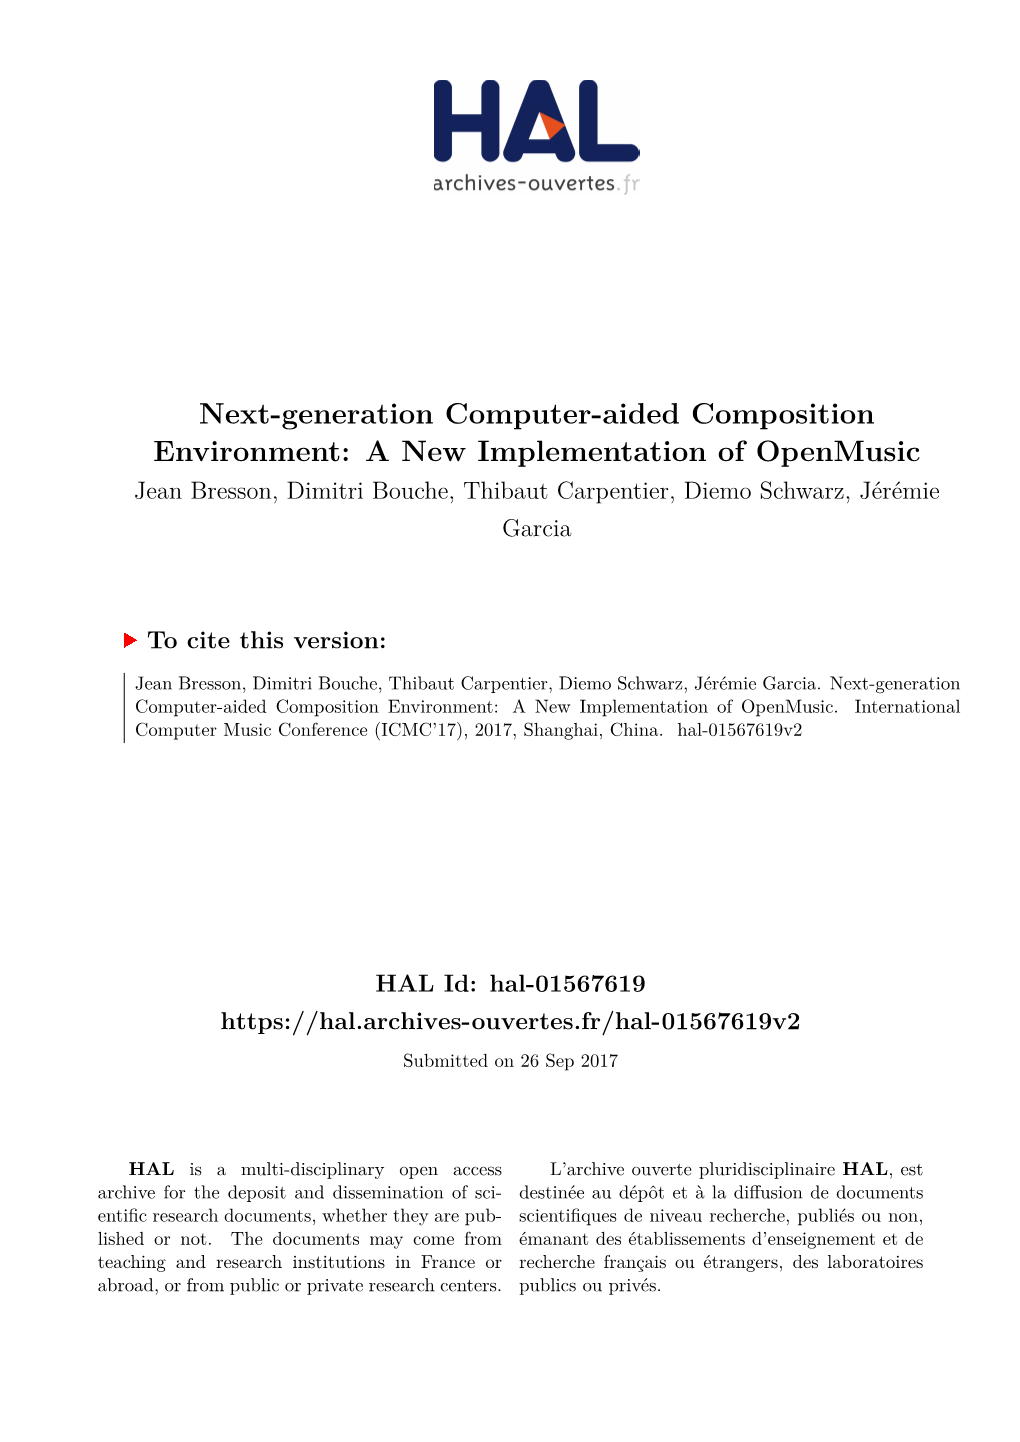 Next-Generation Computer-Aided Composition Environment: a New